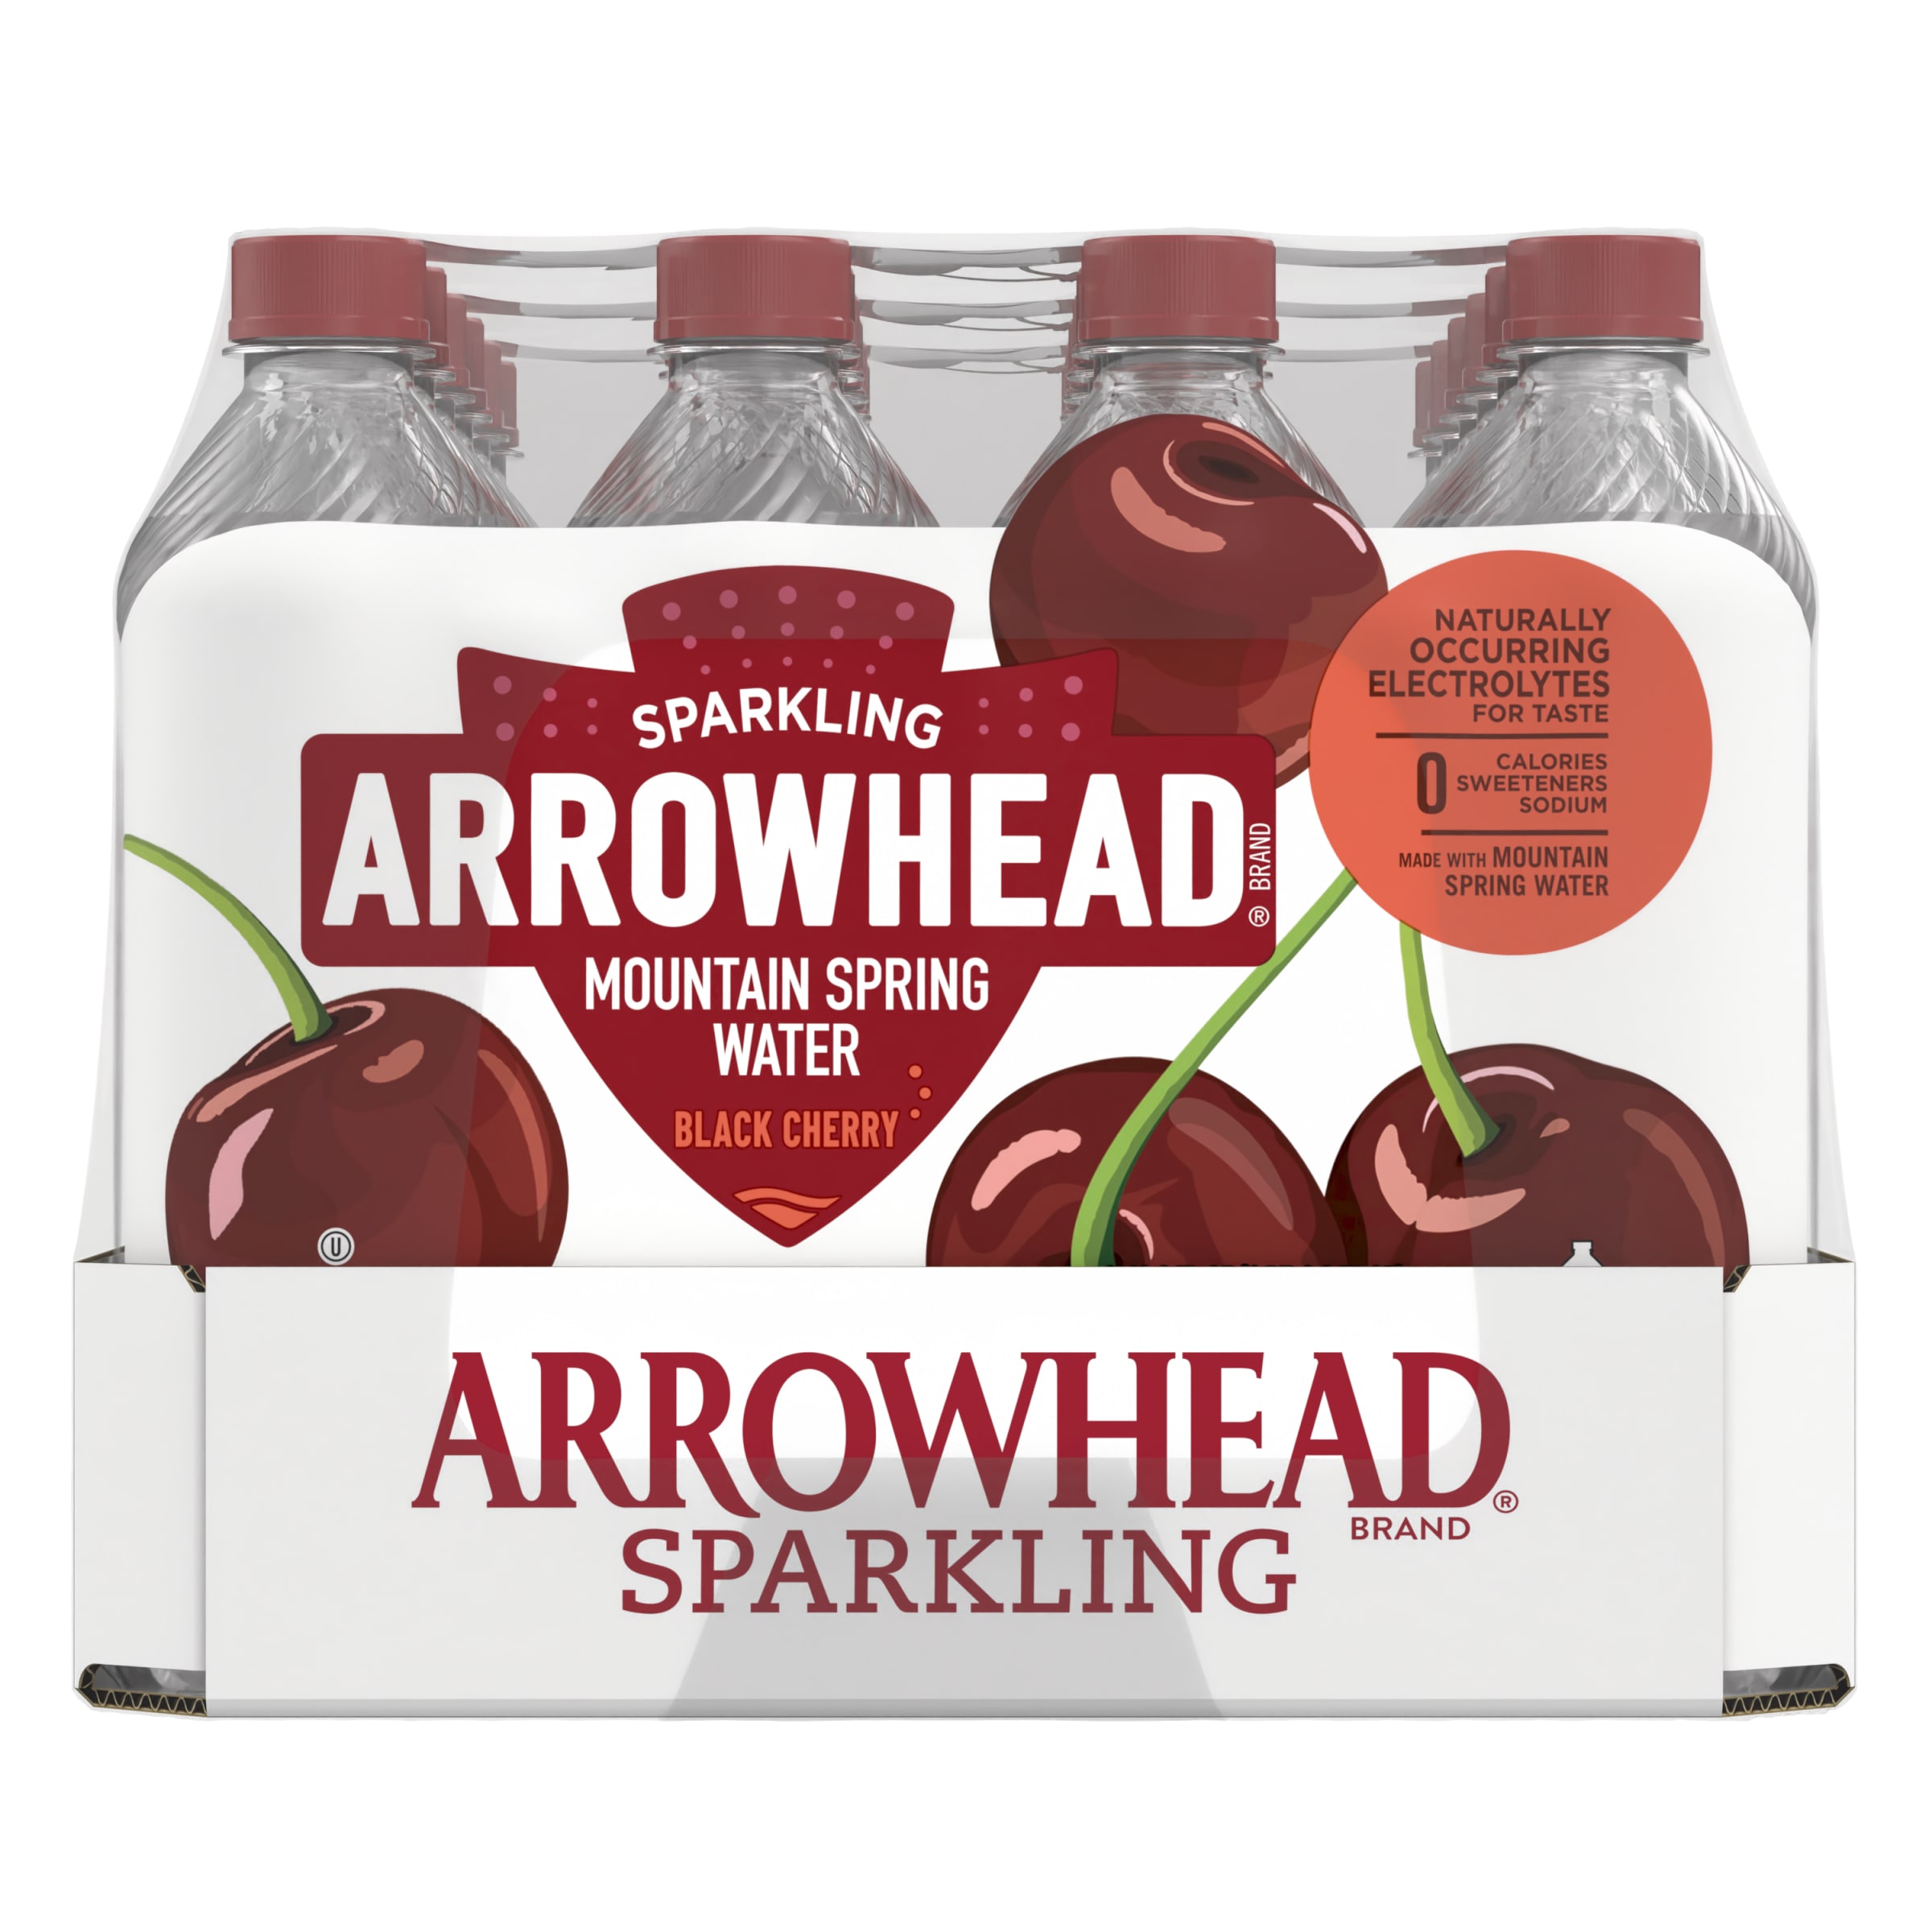 Arrowhead Sparkling Water, Black Cherry, 16.9 oz. Bottles (24 Count) - image 3 of 6